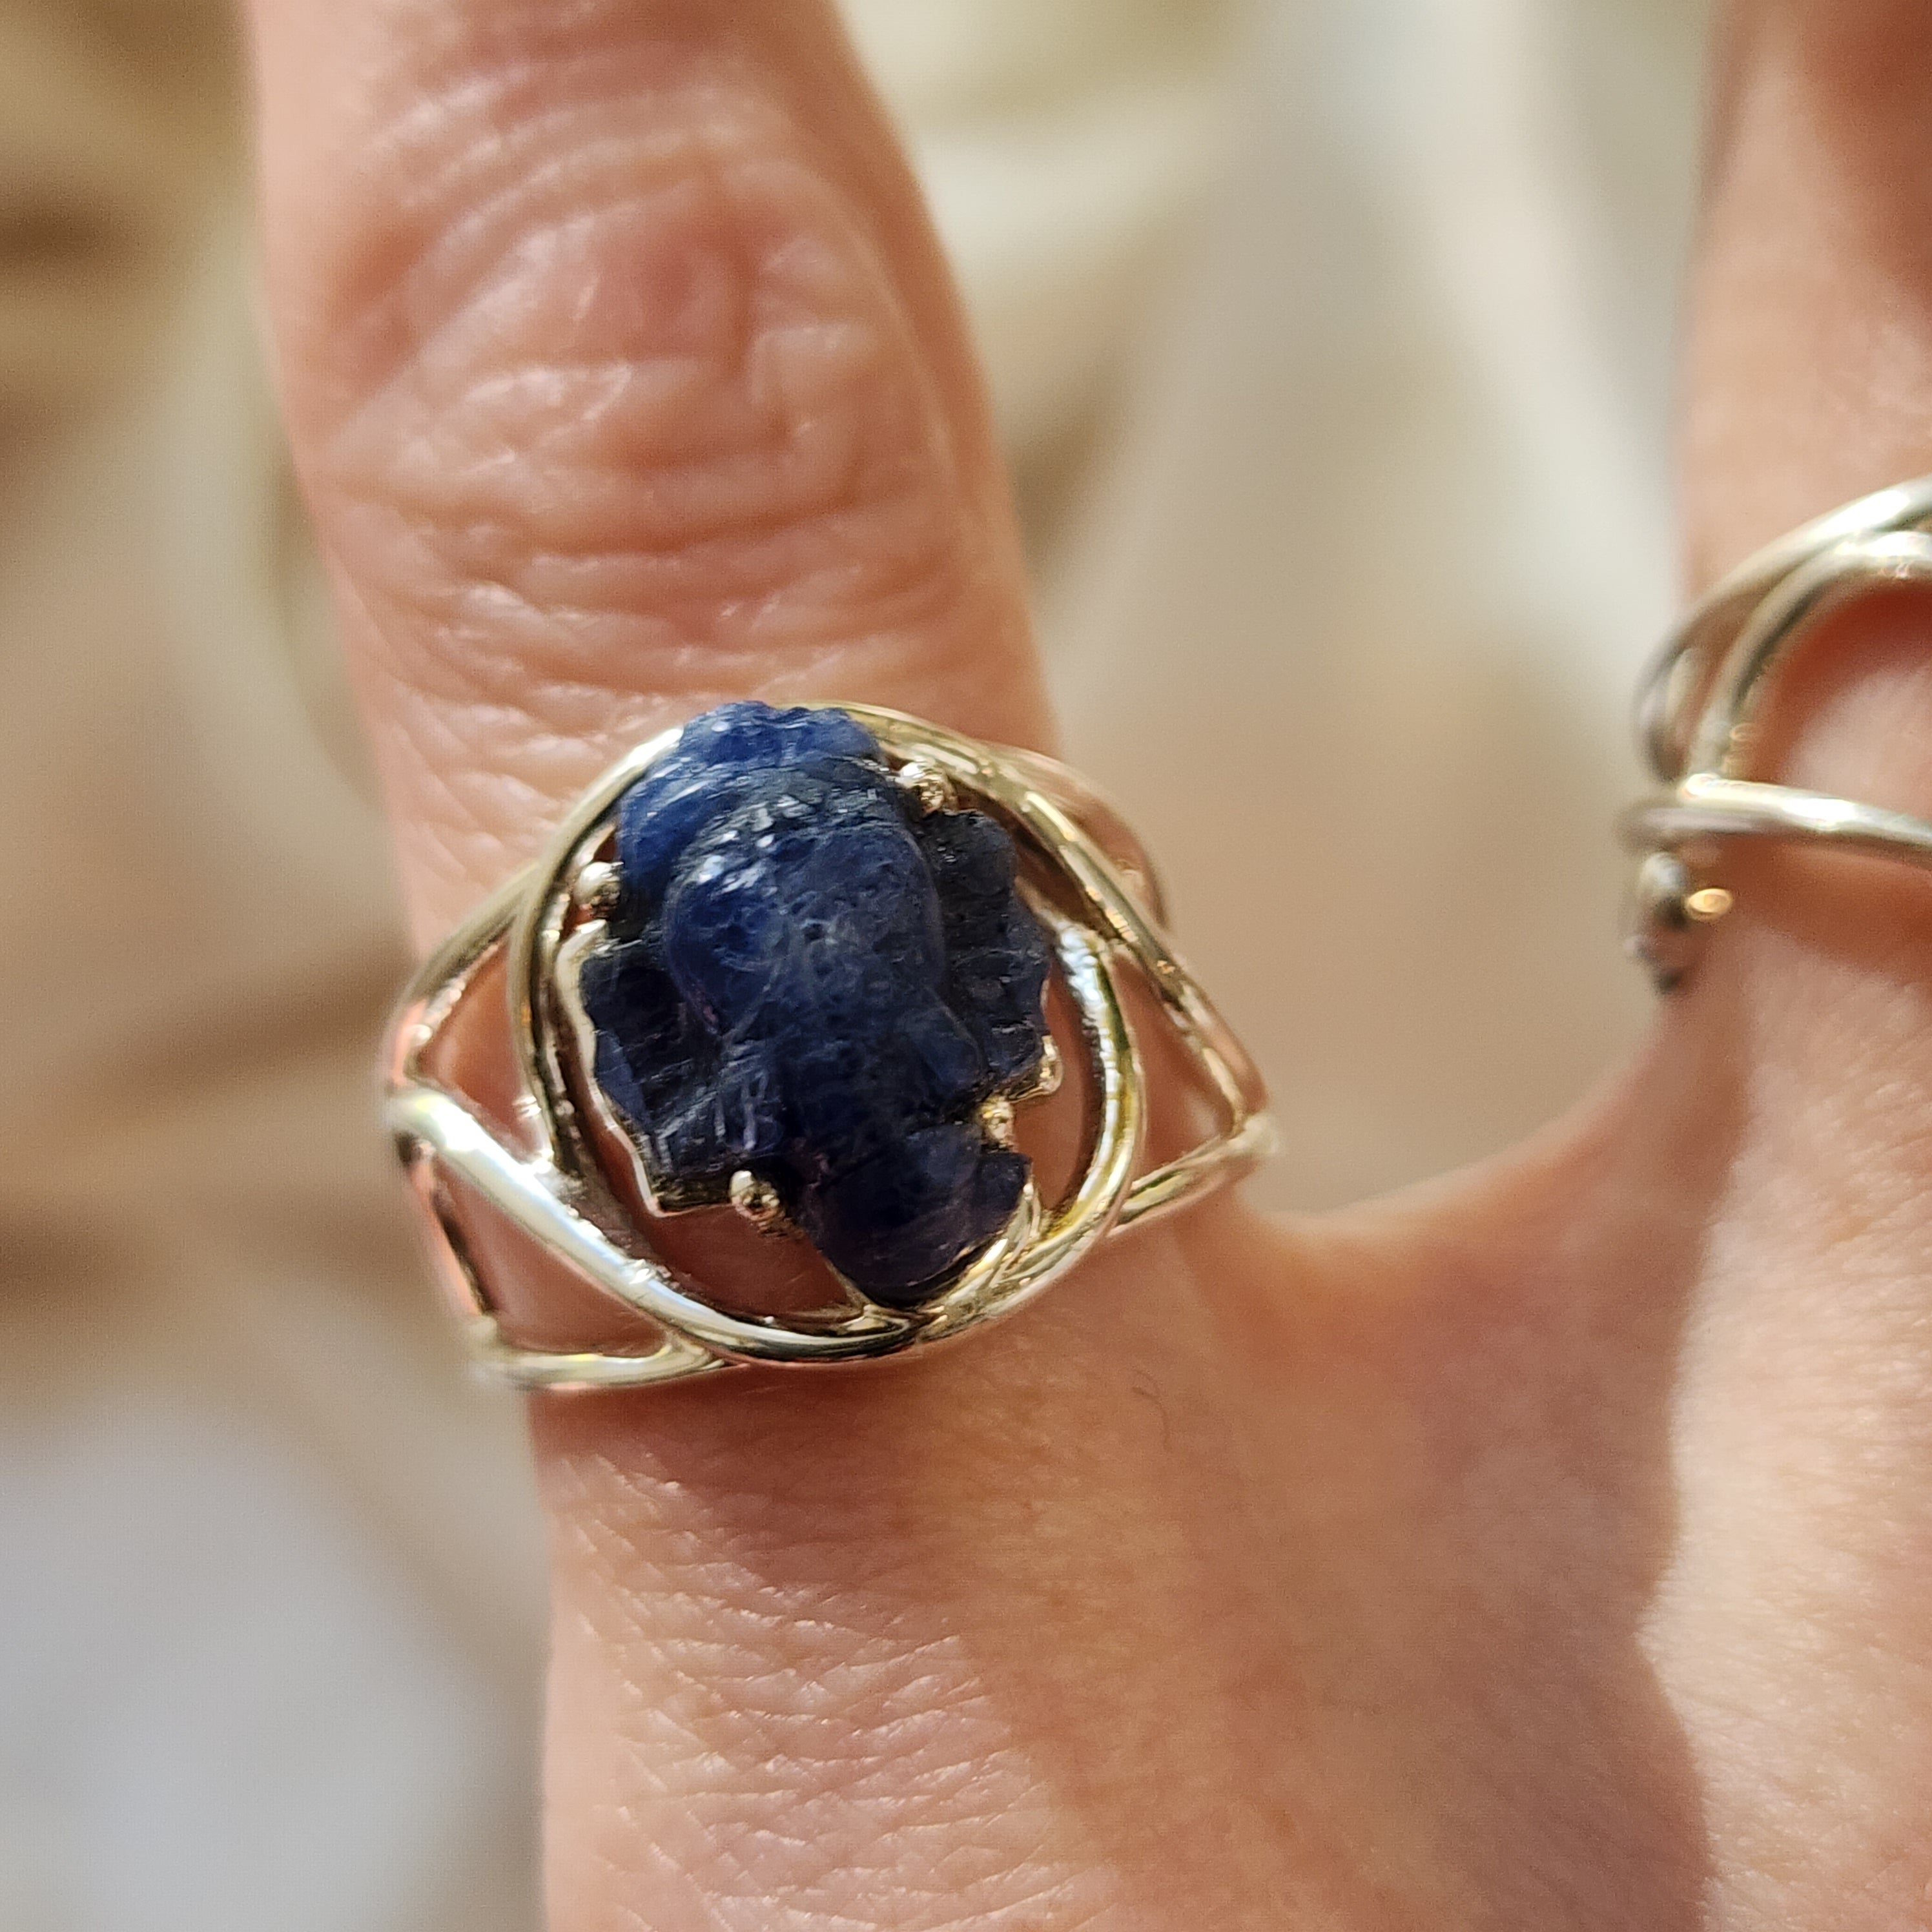 Blue Sapphire Ganesha Finger Cuff Adjustable Ring .925 Sterling Silver for Insight, Wisdom & Clearing Blockages